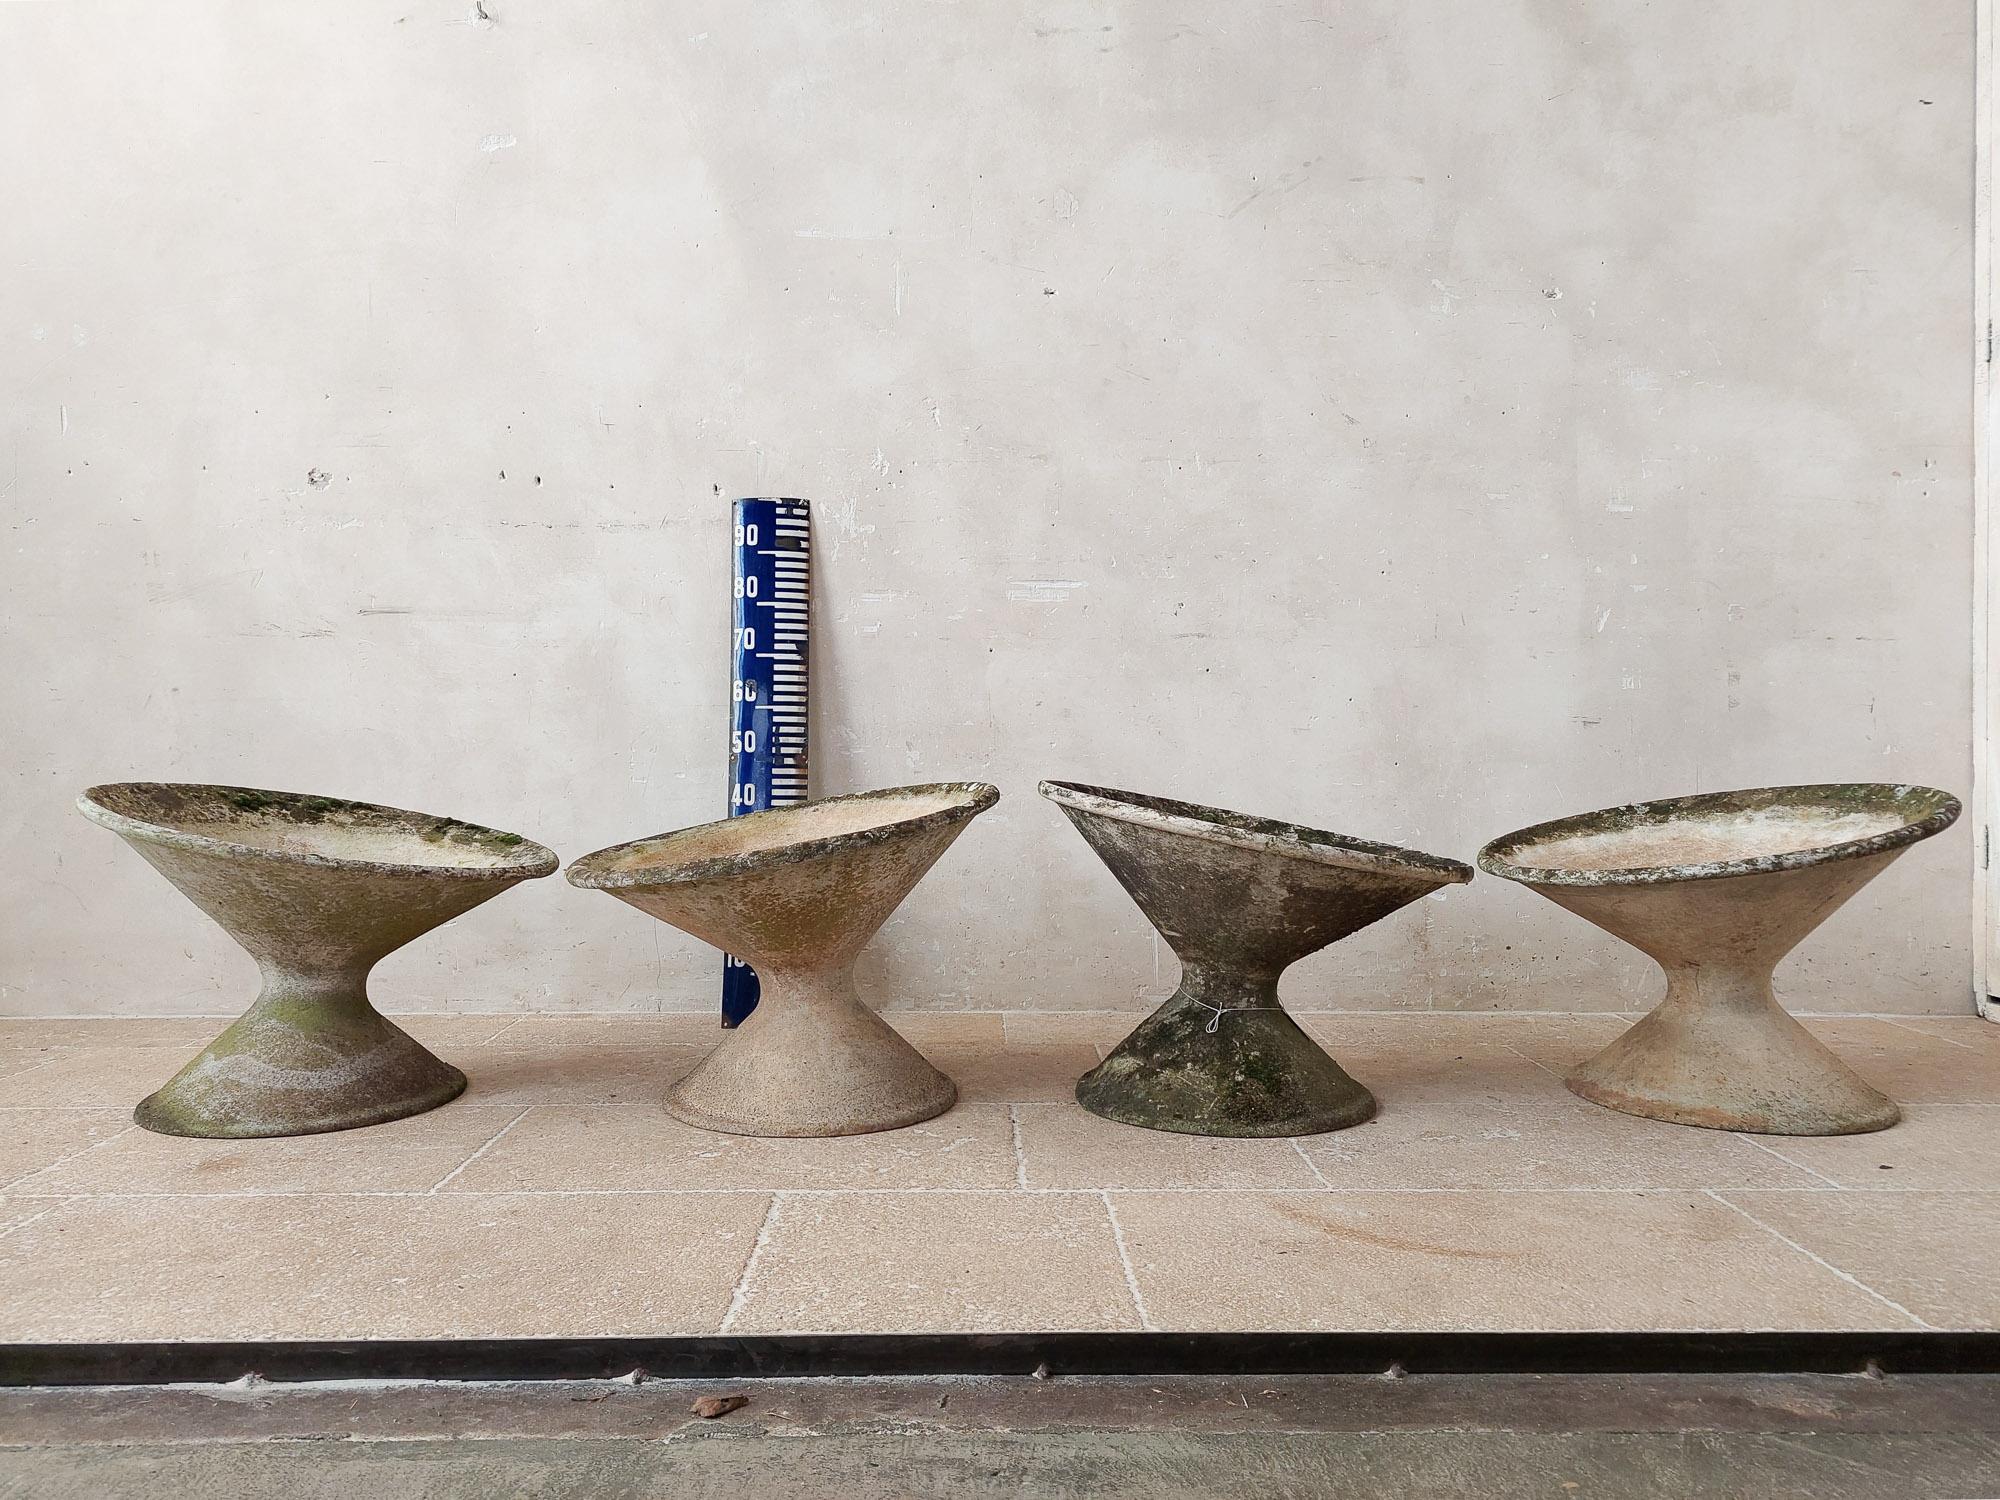 Set of four tilted concrete planters by the Swiss architect Willy Guhl. Manufactured by Eternit AG, who produced all of Guhl's designs. Made from fiber cement, the planters are lightweight and durable in all climates. These sculptural planters have